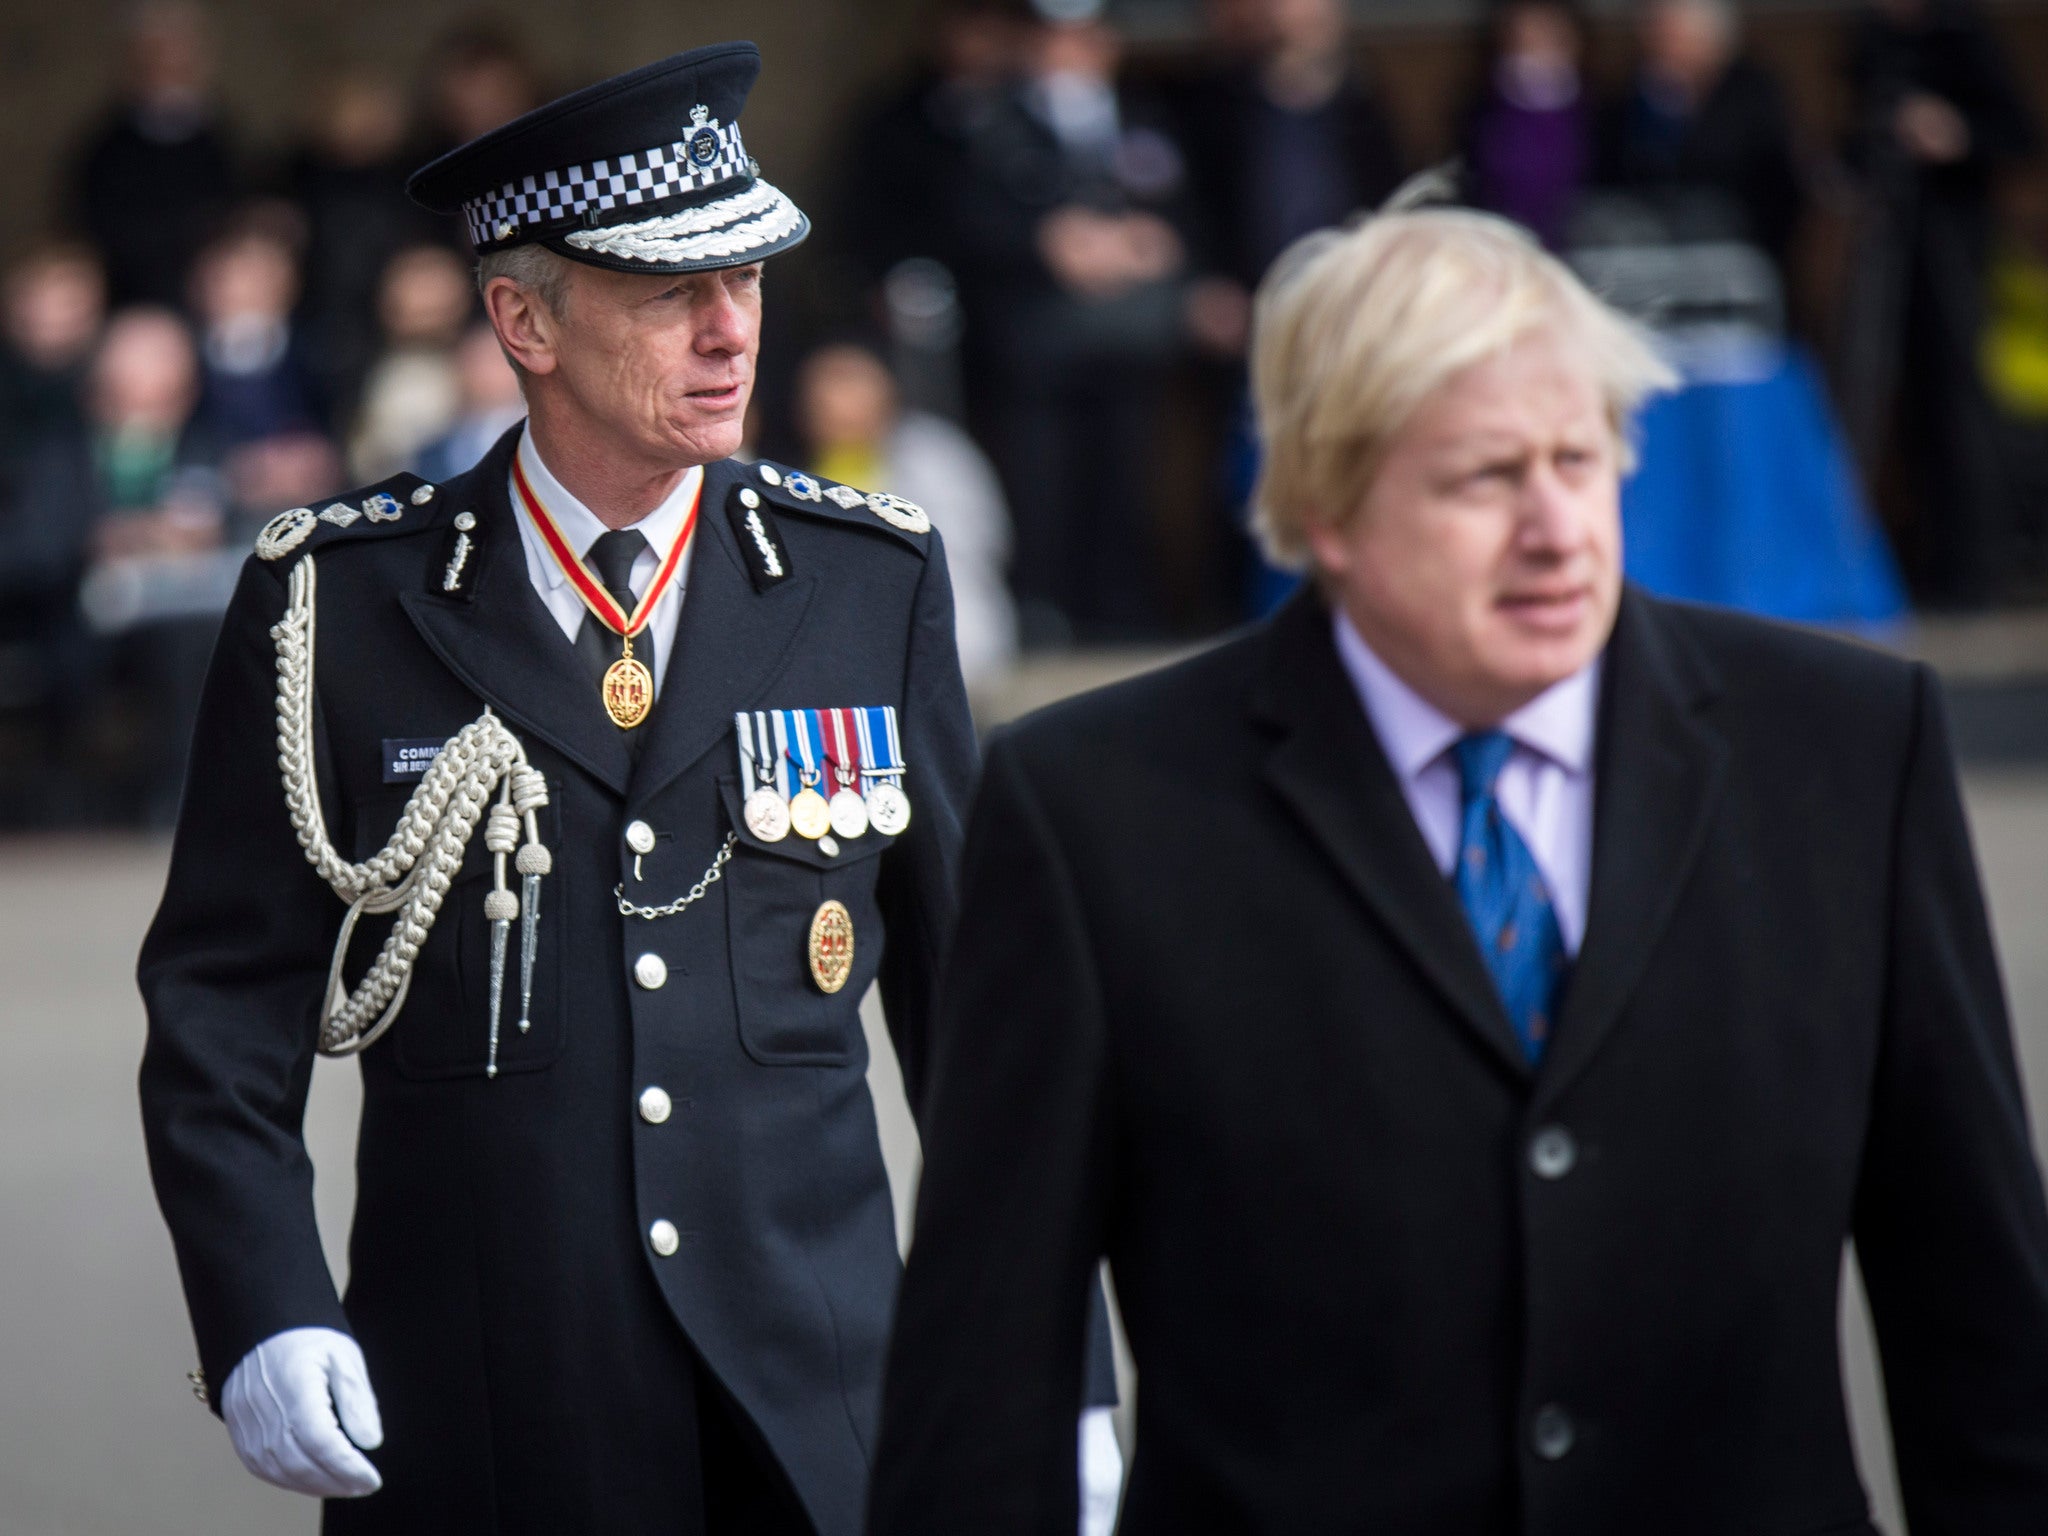 The Mayor of London and the Met Police Chief